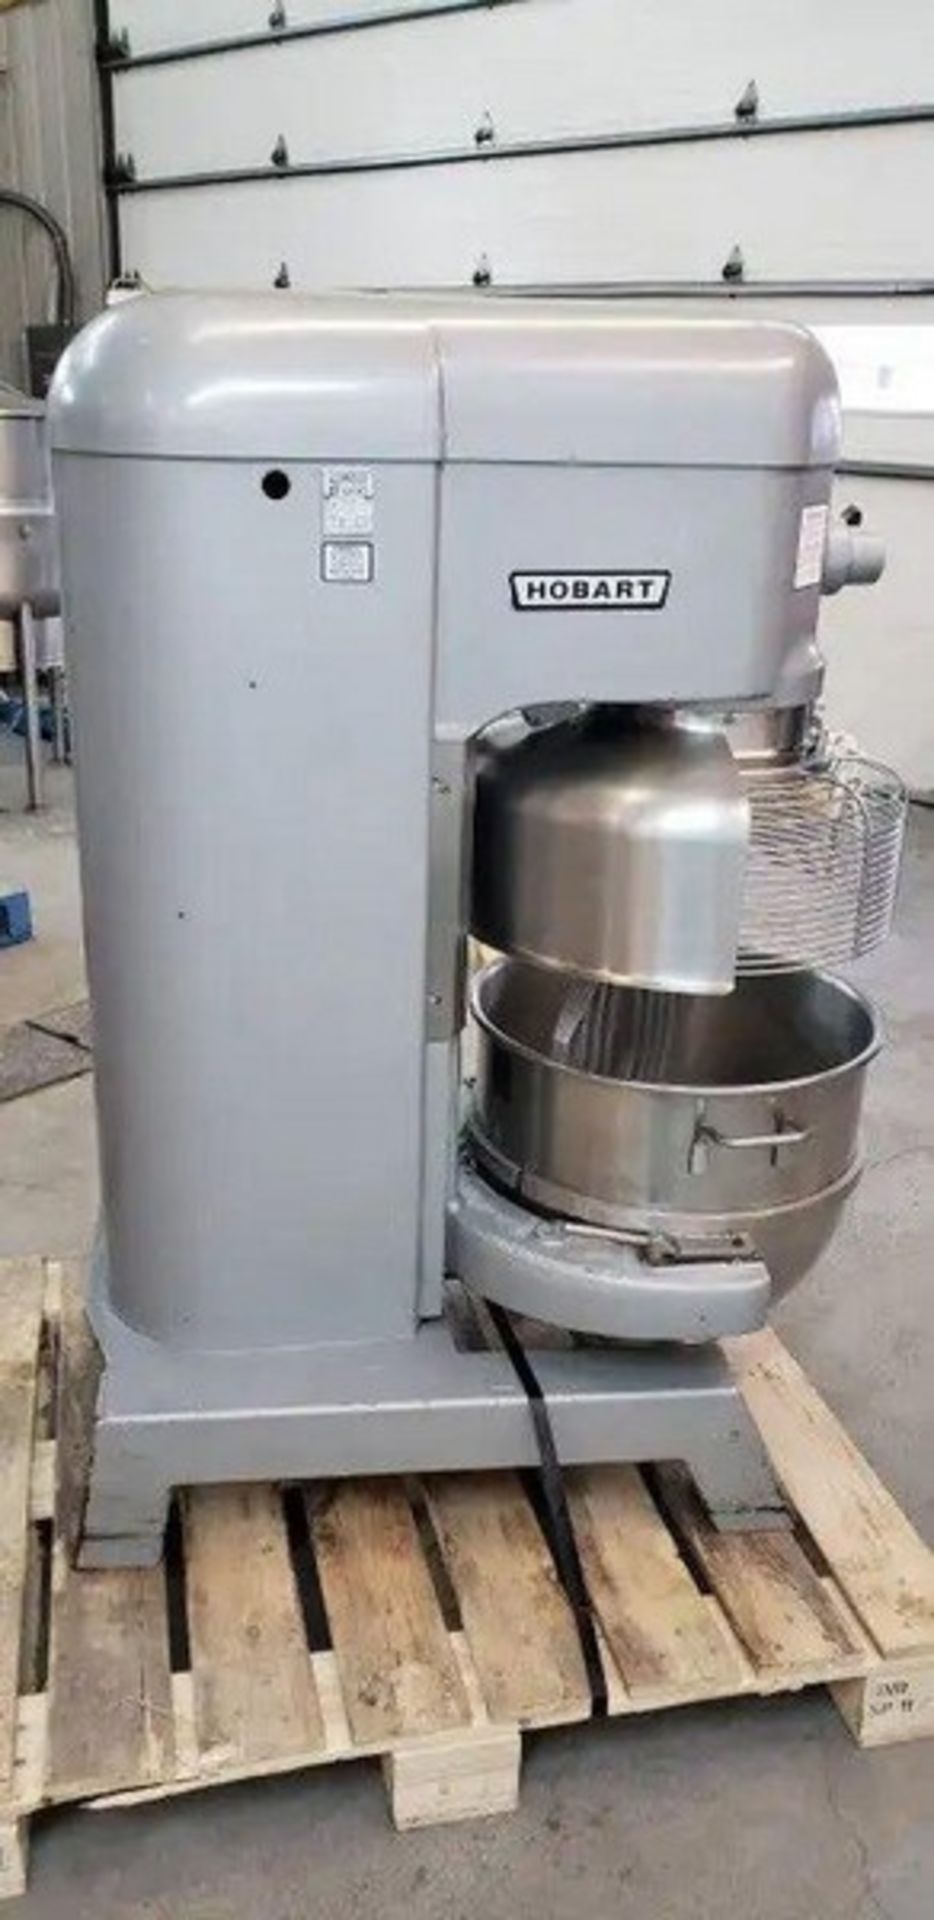 Hobart Mixer Model L-800 80 Quart Including Bowl and Dolly With Beater Arm and Hook Attachments in - Image 3 of 5